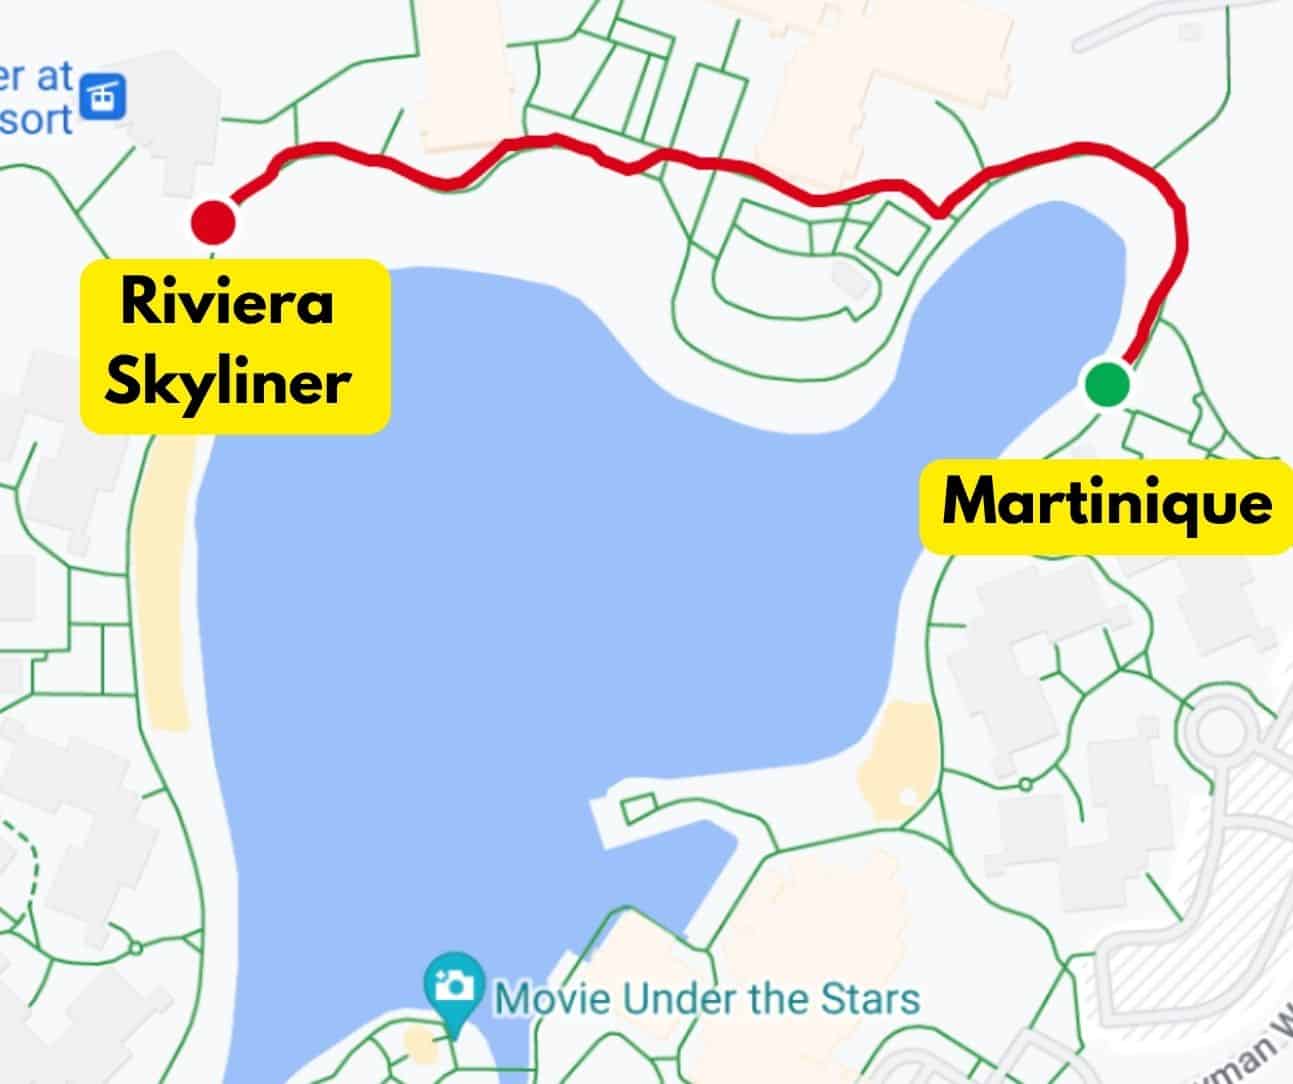 Walking Distance from Martinique to Riviera Skyliner 